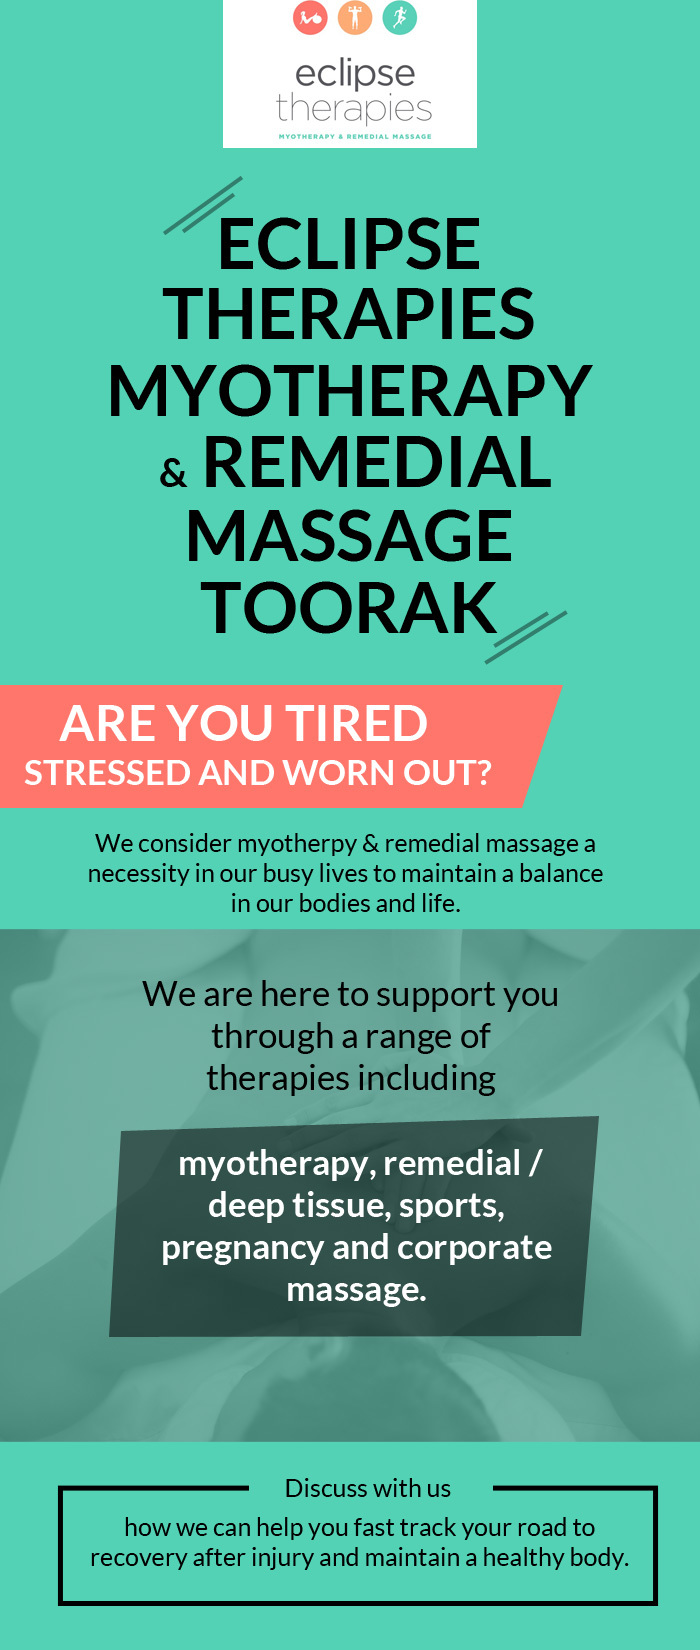 Get Myotherapy and Remedial Massage in Toorak from Eclipse Therapies